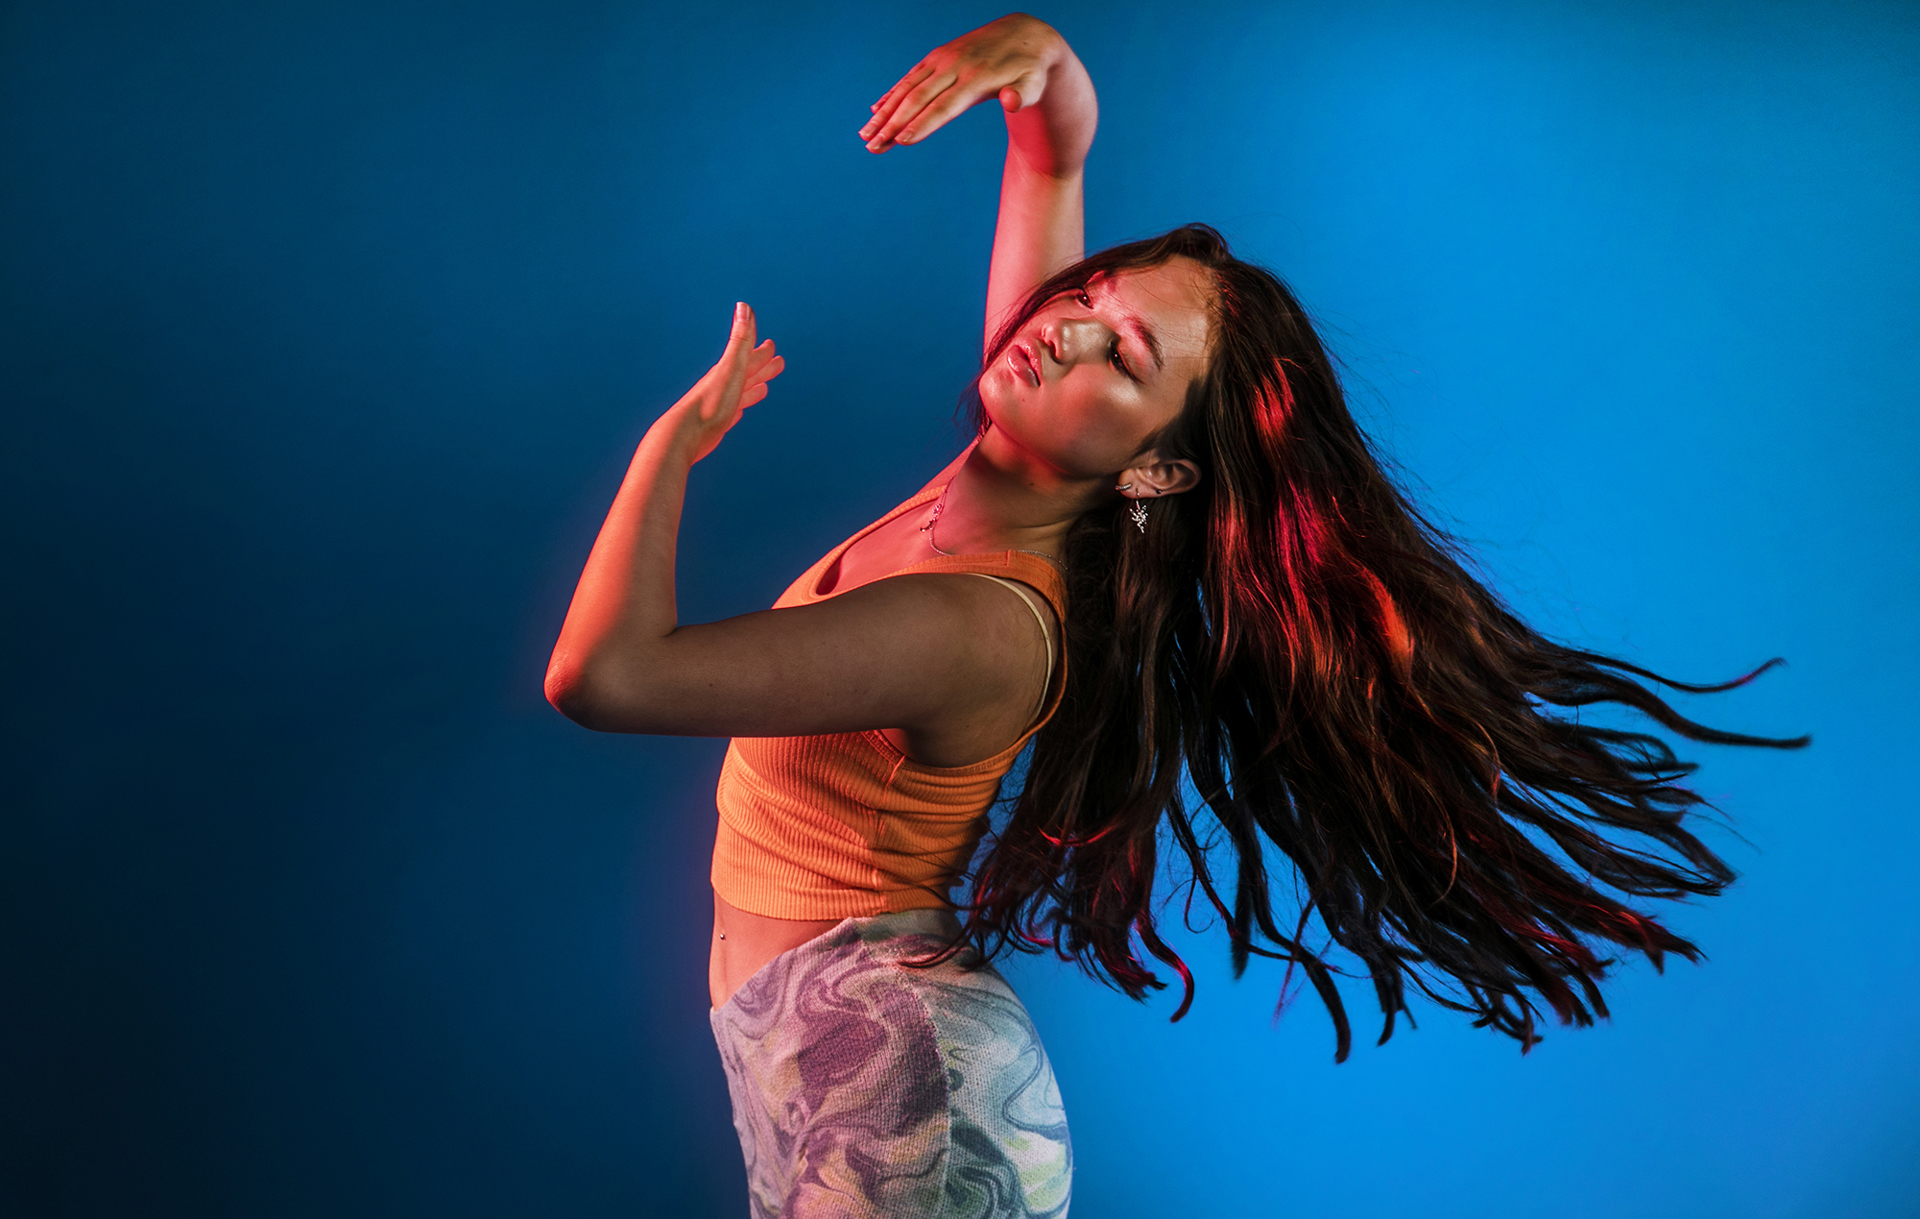 global majority dancer flicking long brown hair back with arms infront of face on blue studio background. Wearing orange crop top and camo jeans.